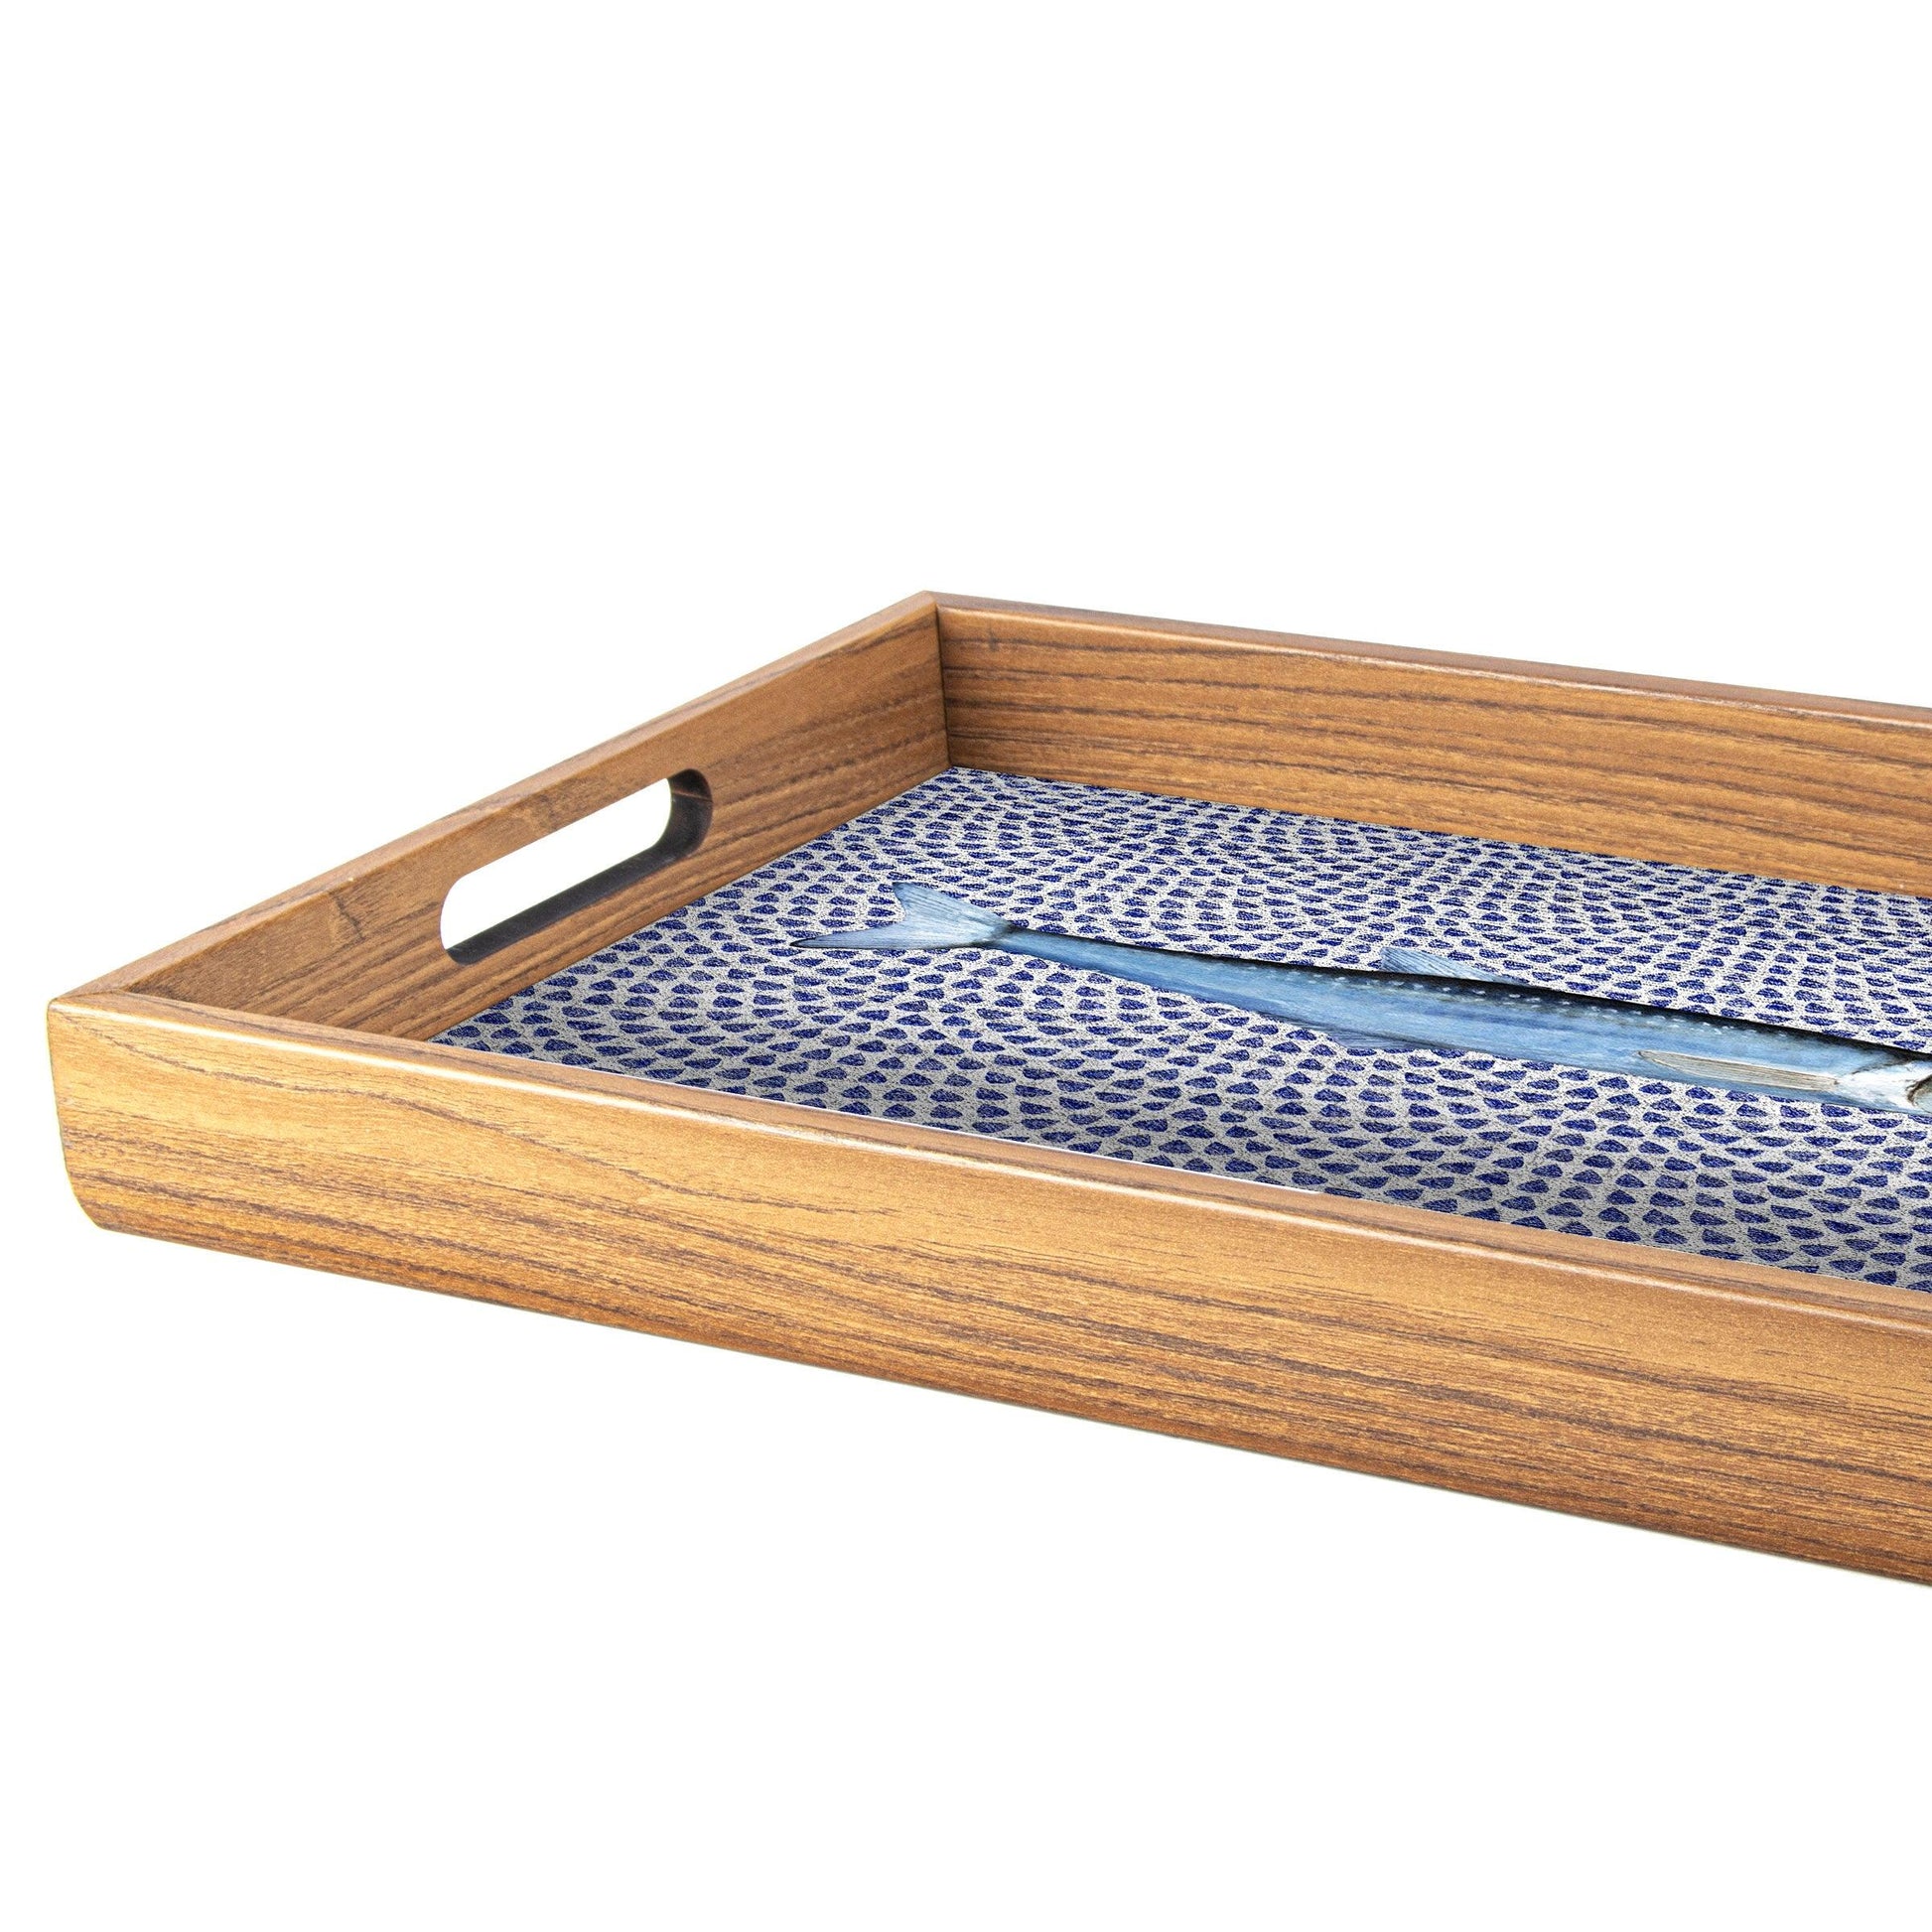 WOODEN TRAY with printed design - FISH - LAZADO